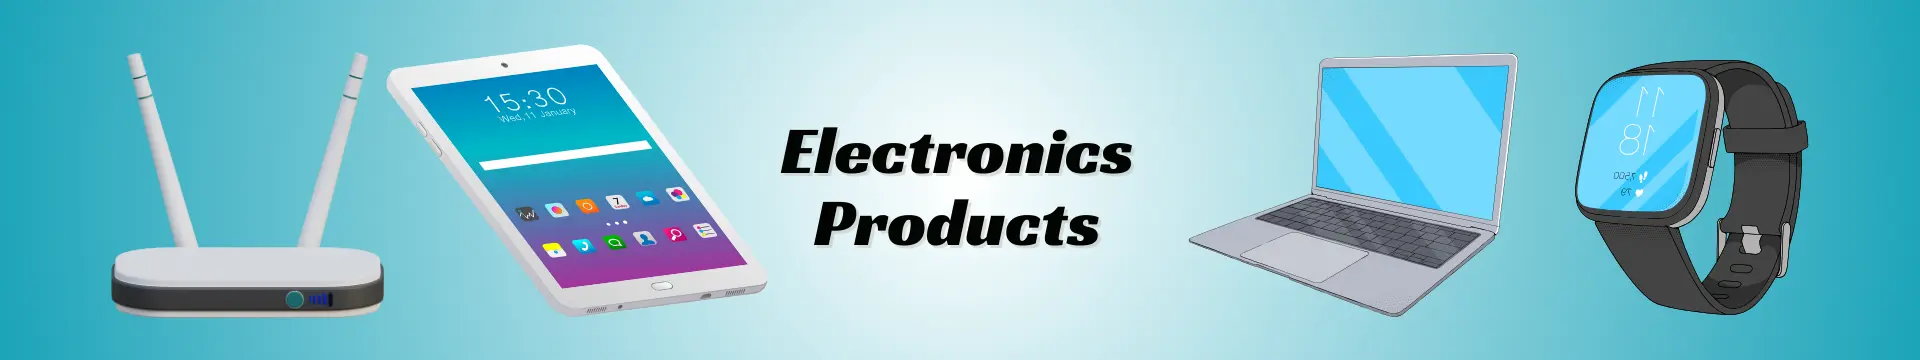 Electronics Products Banner